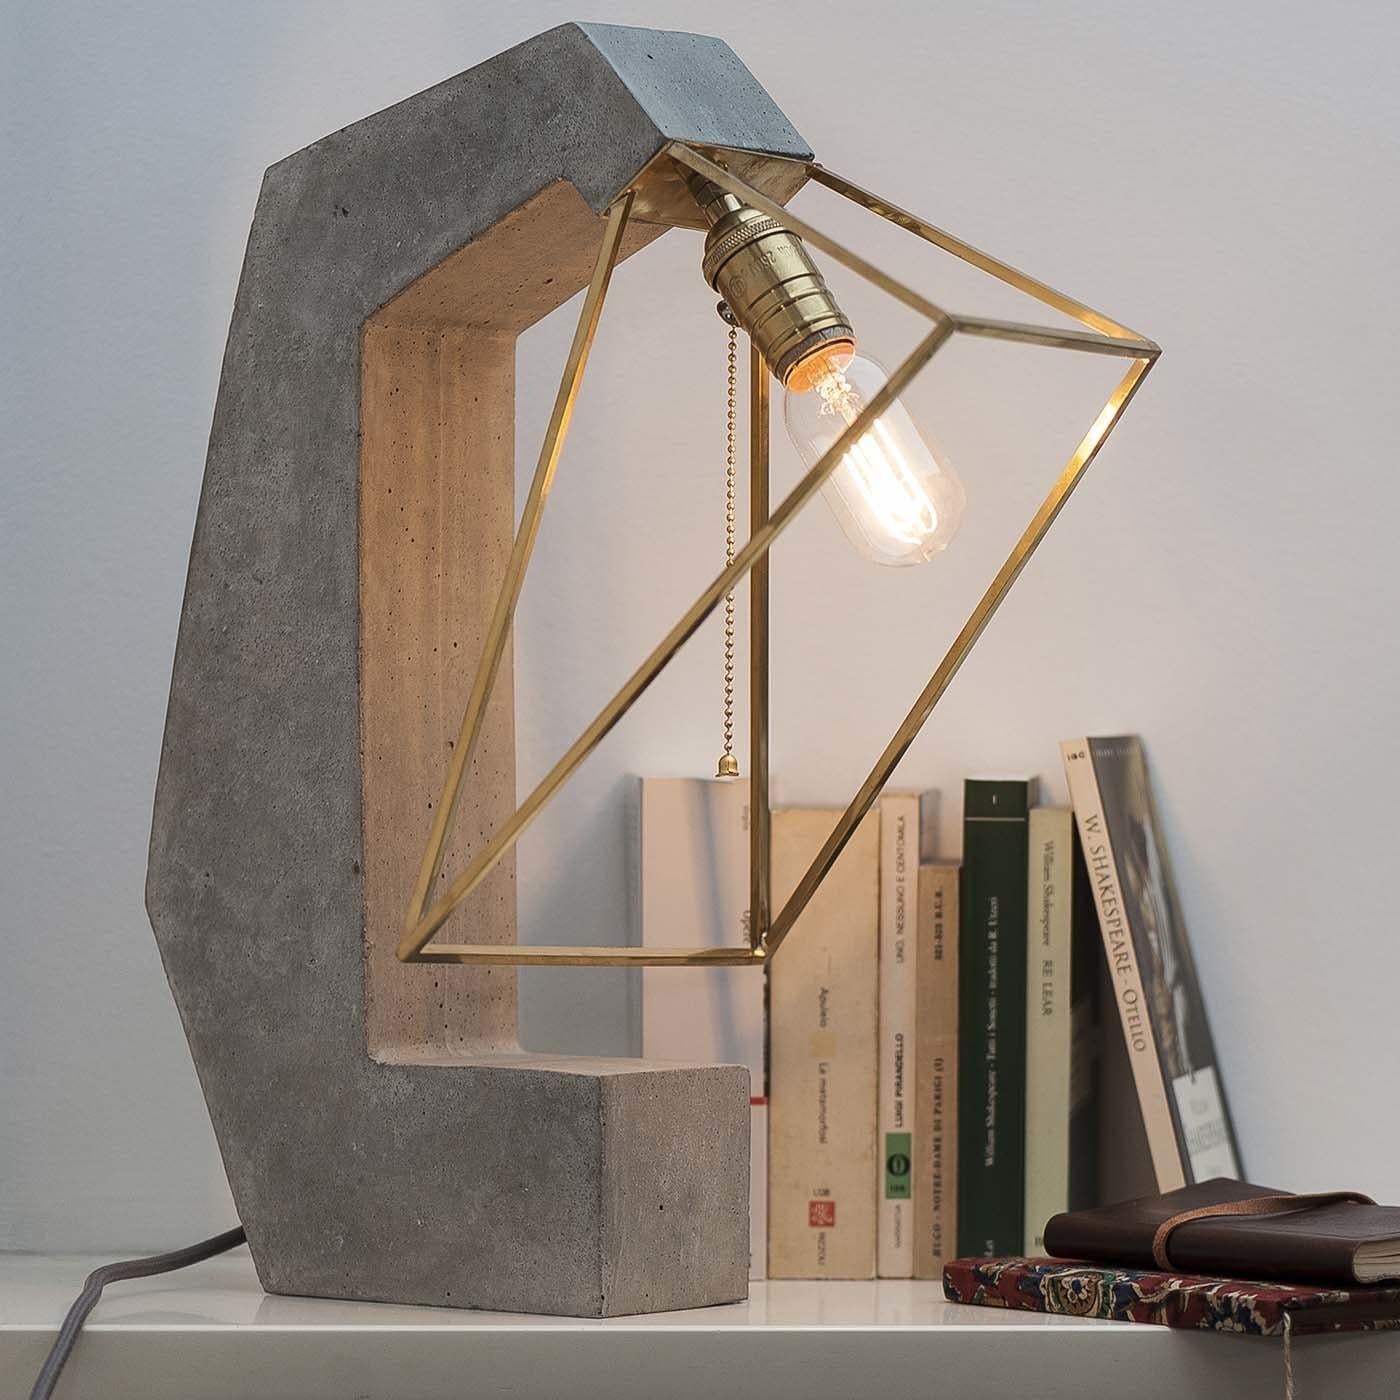 Contemporary Inside Out Table Lamp